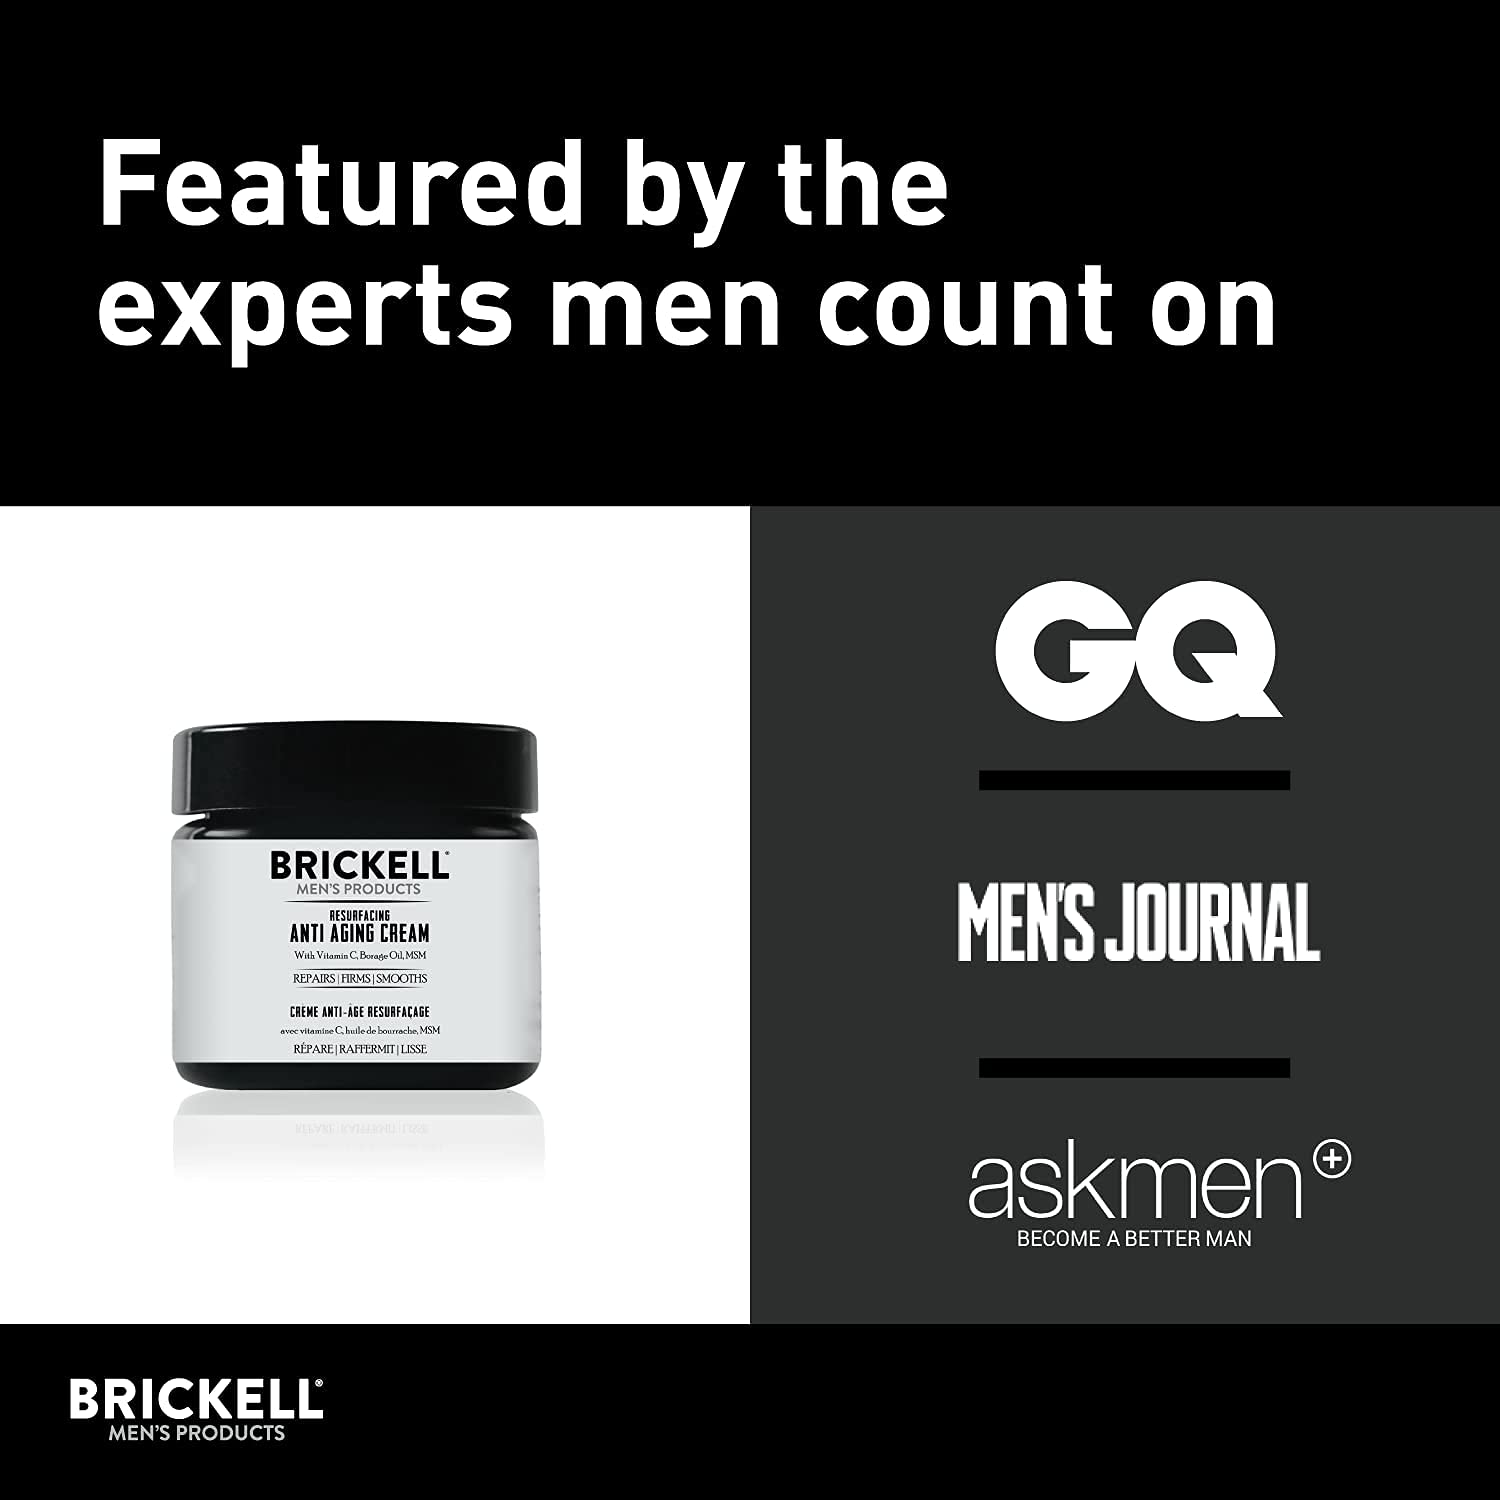 Brickell Men's Products Resurfacing Anti-Aging Cream - 2 Ounce-1